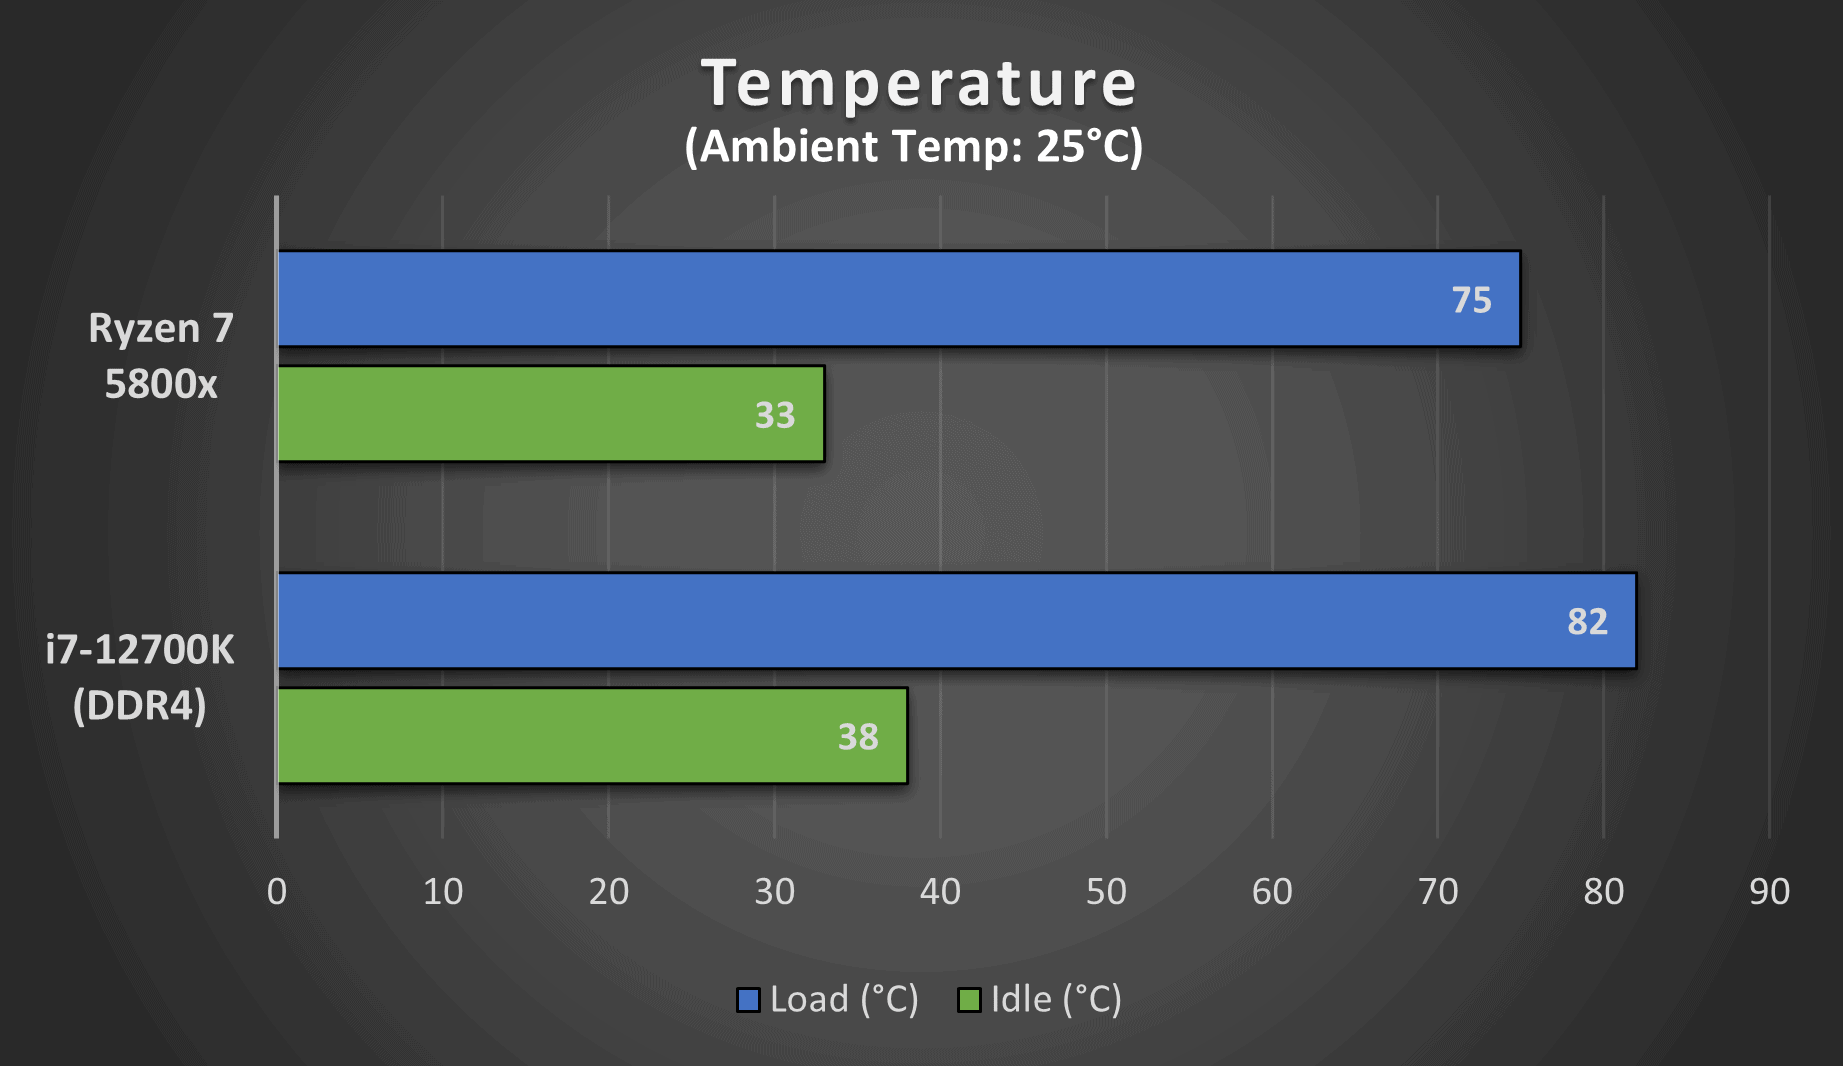 This image compares the idle and under-load temperatures between the Ryzen 7 5800x and the i7 12700K (DDR4)